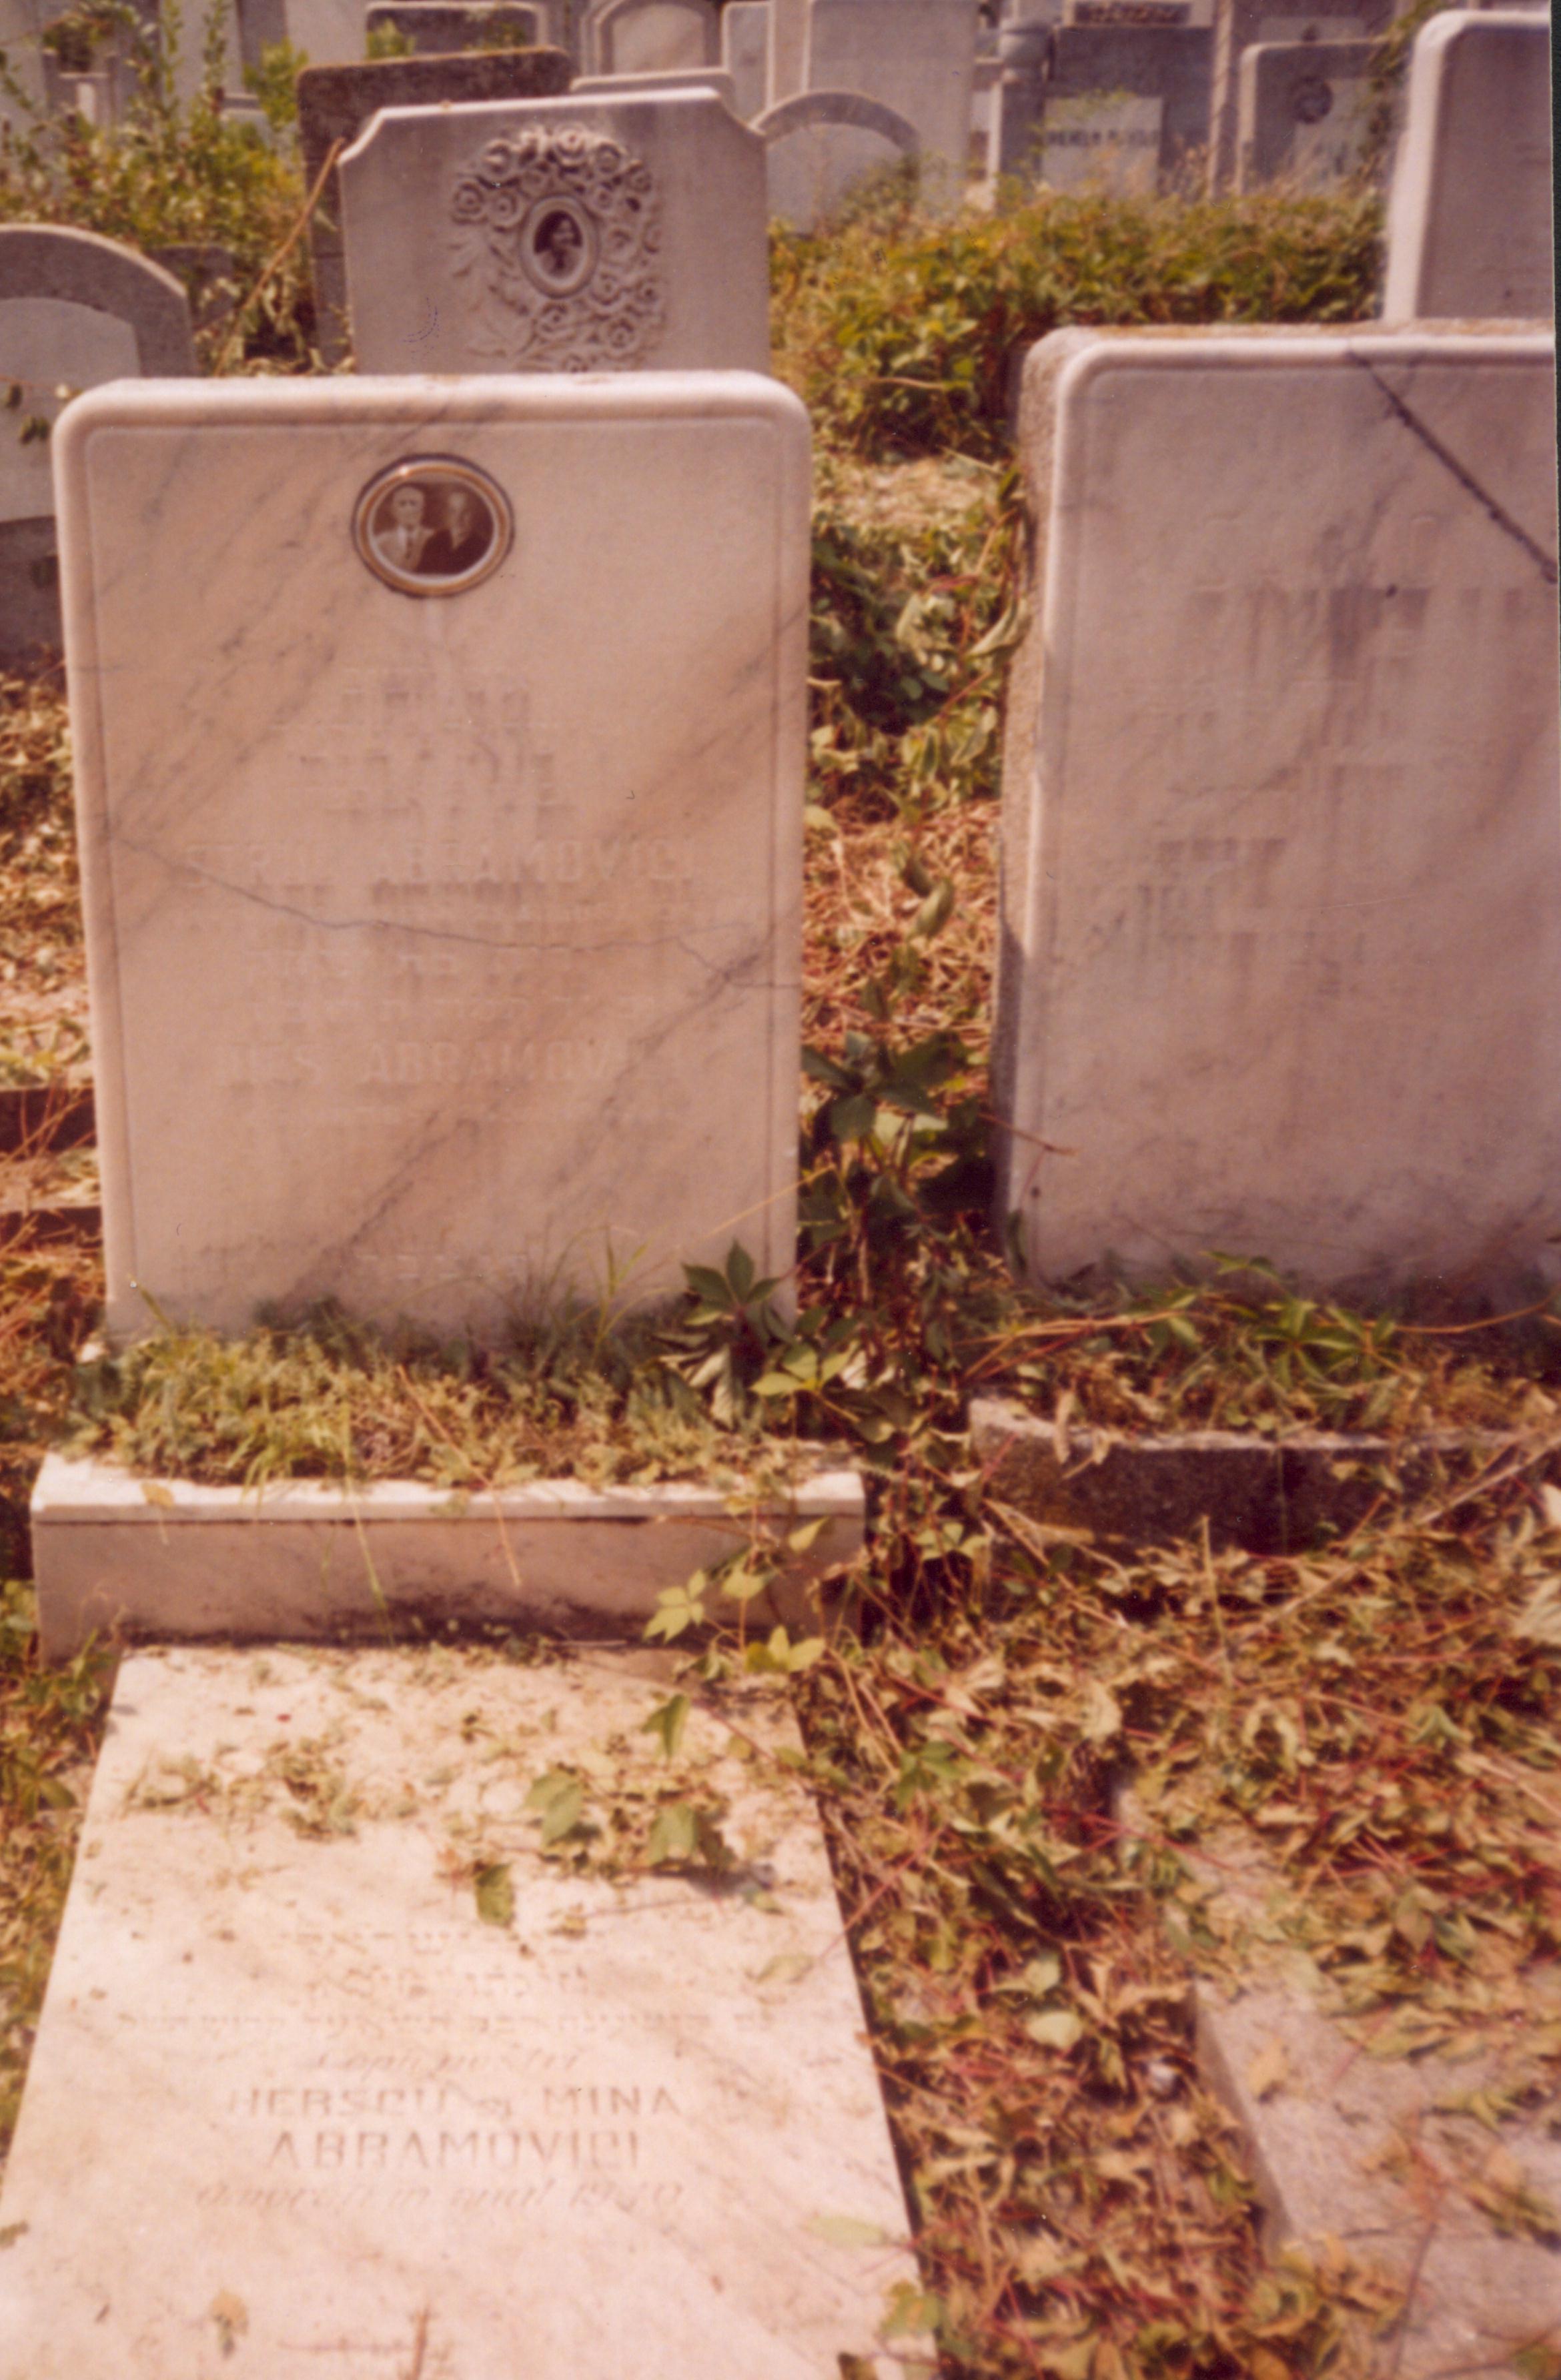 Taken in August 2004 at the Jewish Ashkenaz Cemetery "Giurgiului" at RO(Bucureşti) and sourced from JG029873=ALX=FinkelsteinAlex.